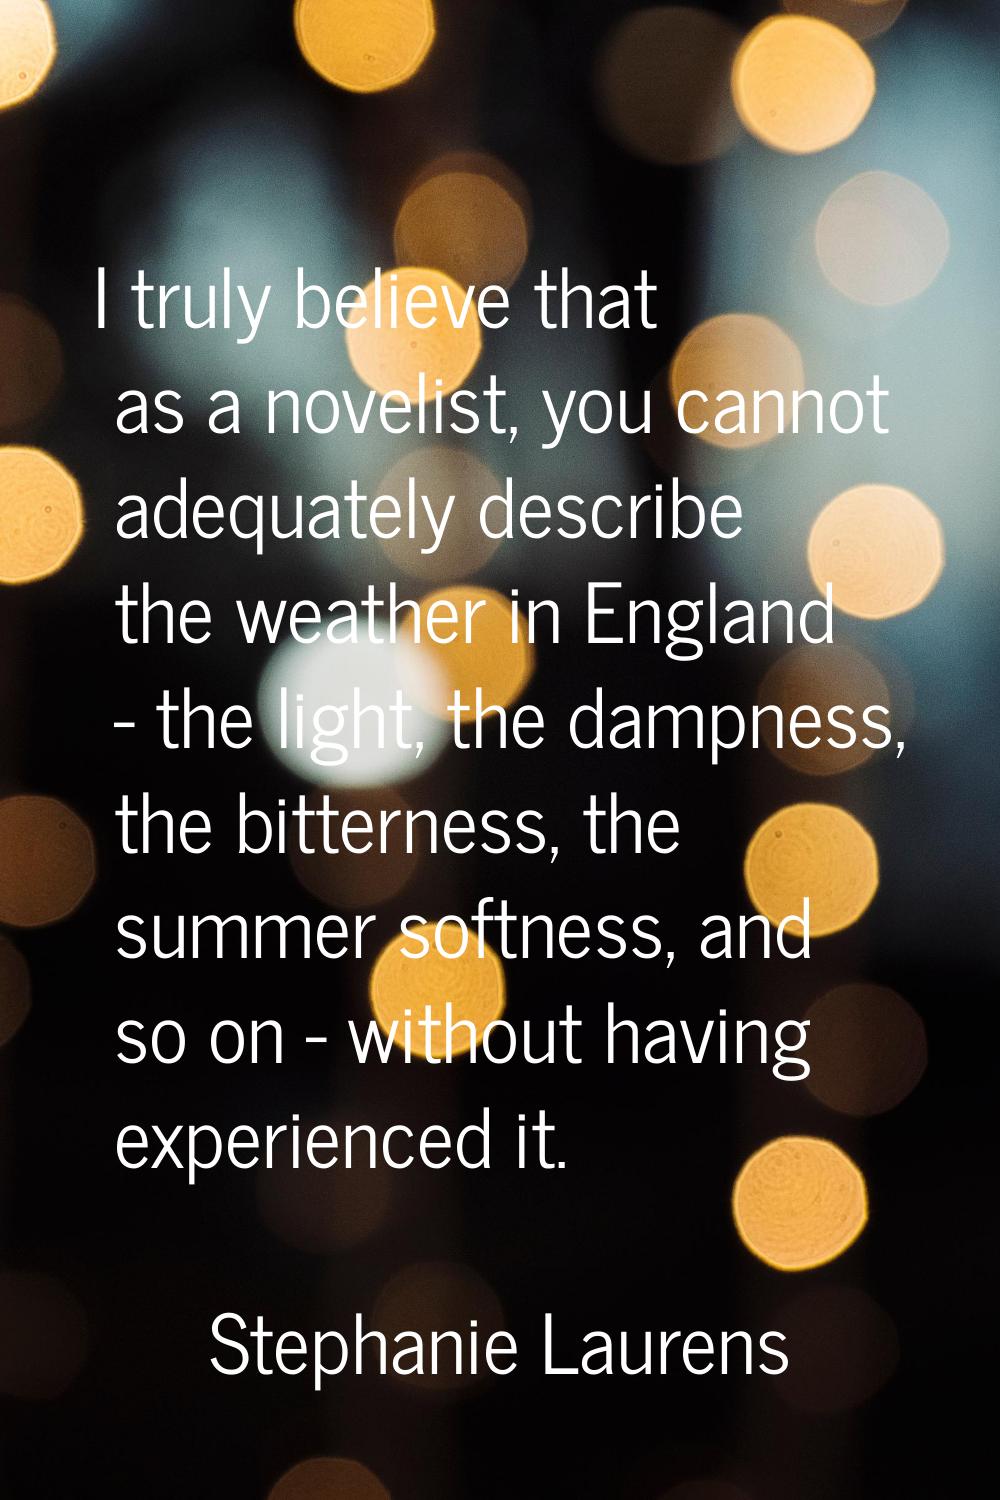 I truly believe that as a novelist, you cannot adequately describe the weather in England - the lig